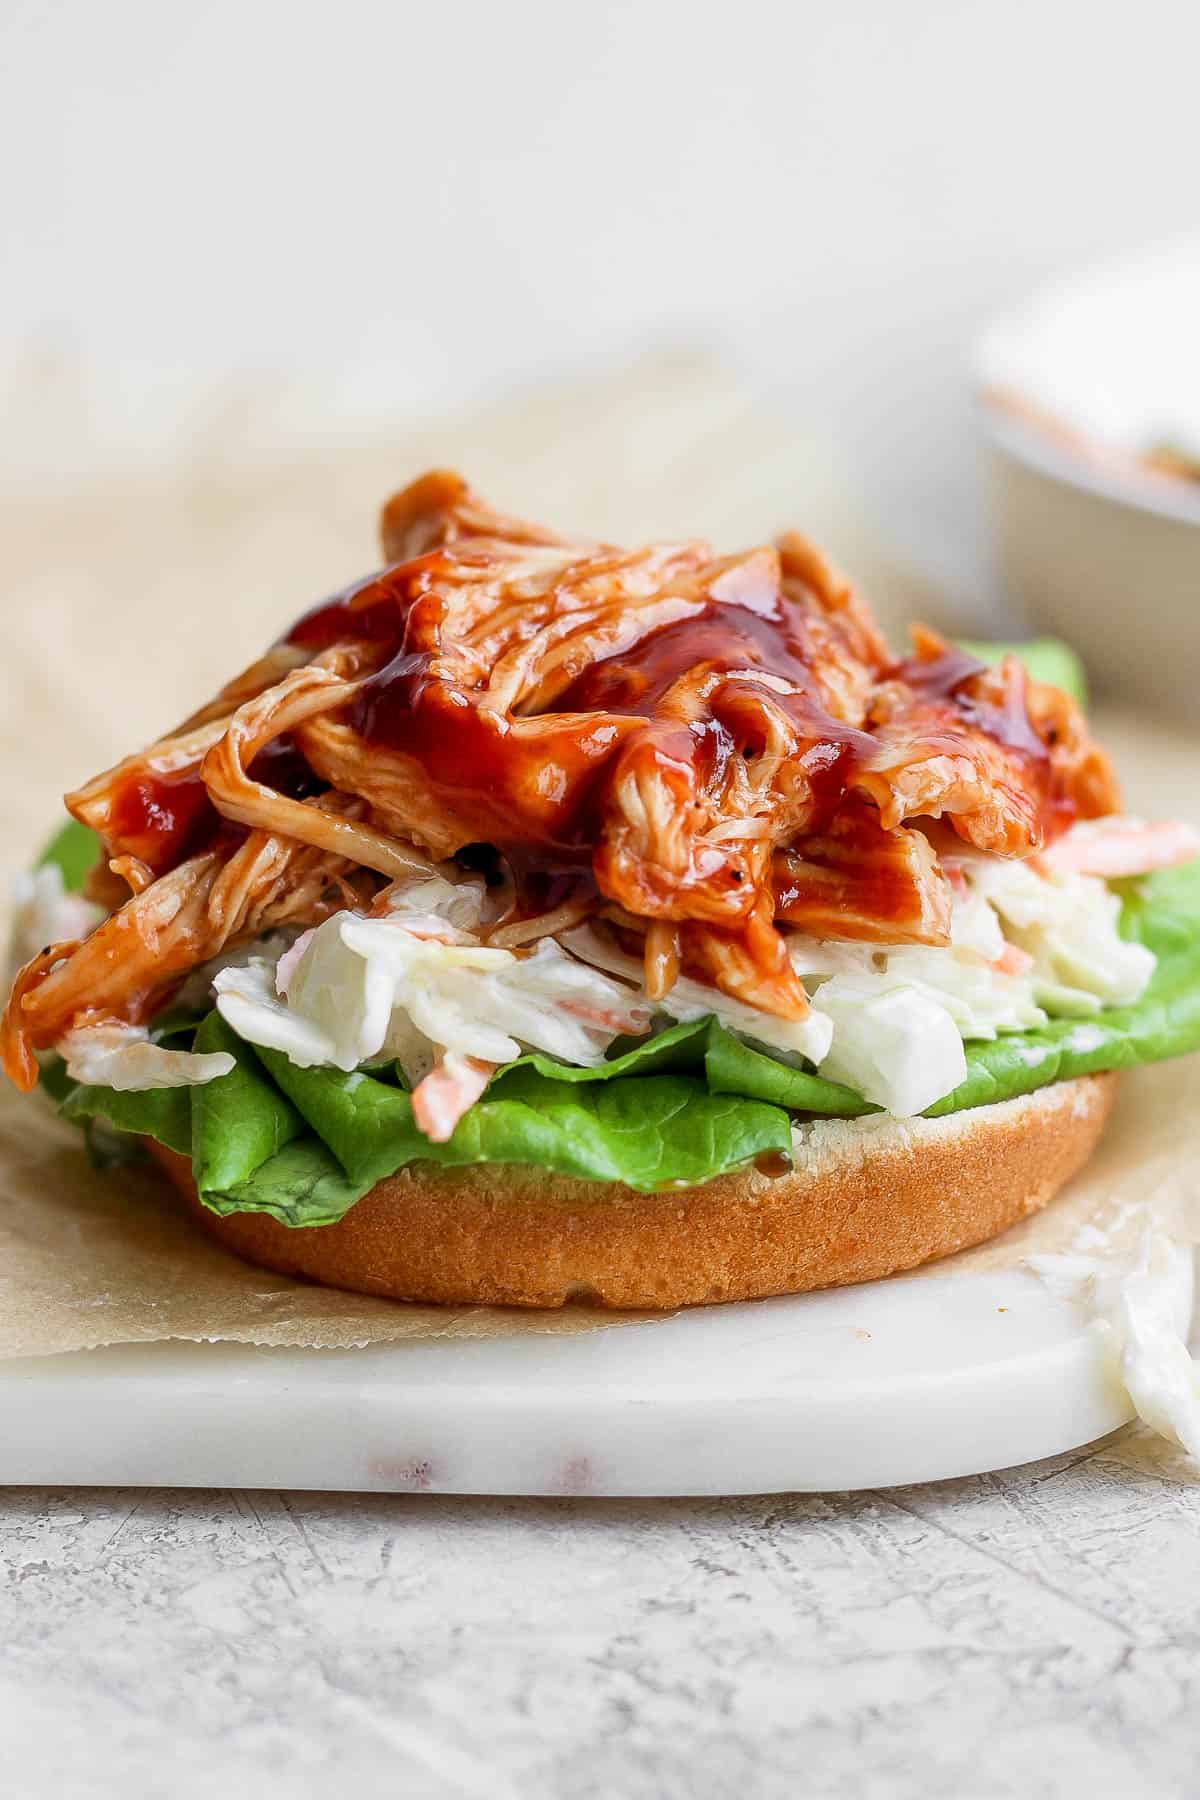 BBQ chicken on a bun with coleslaw and lettuce.